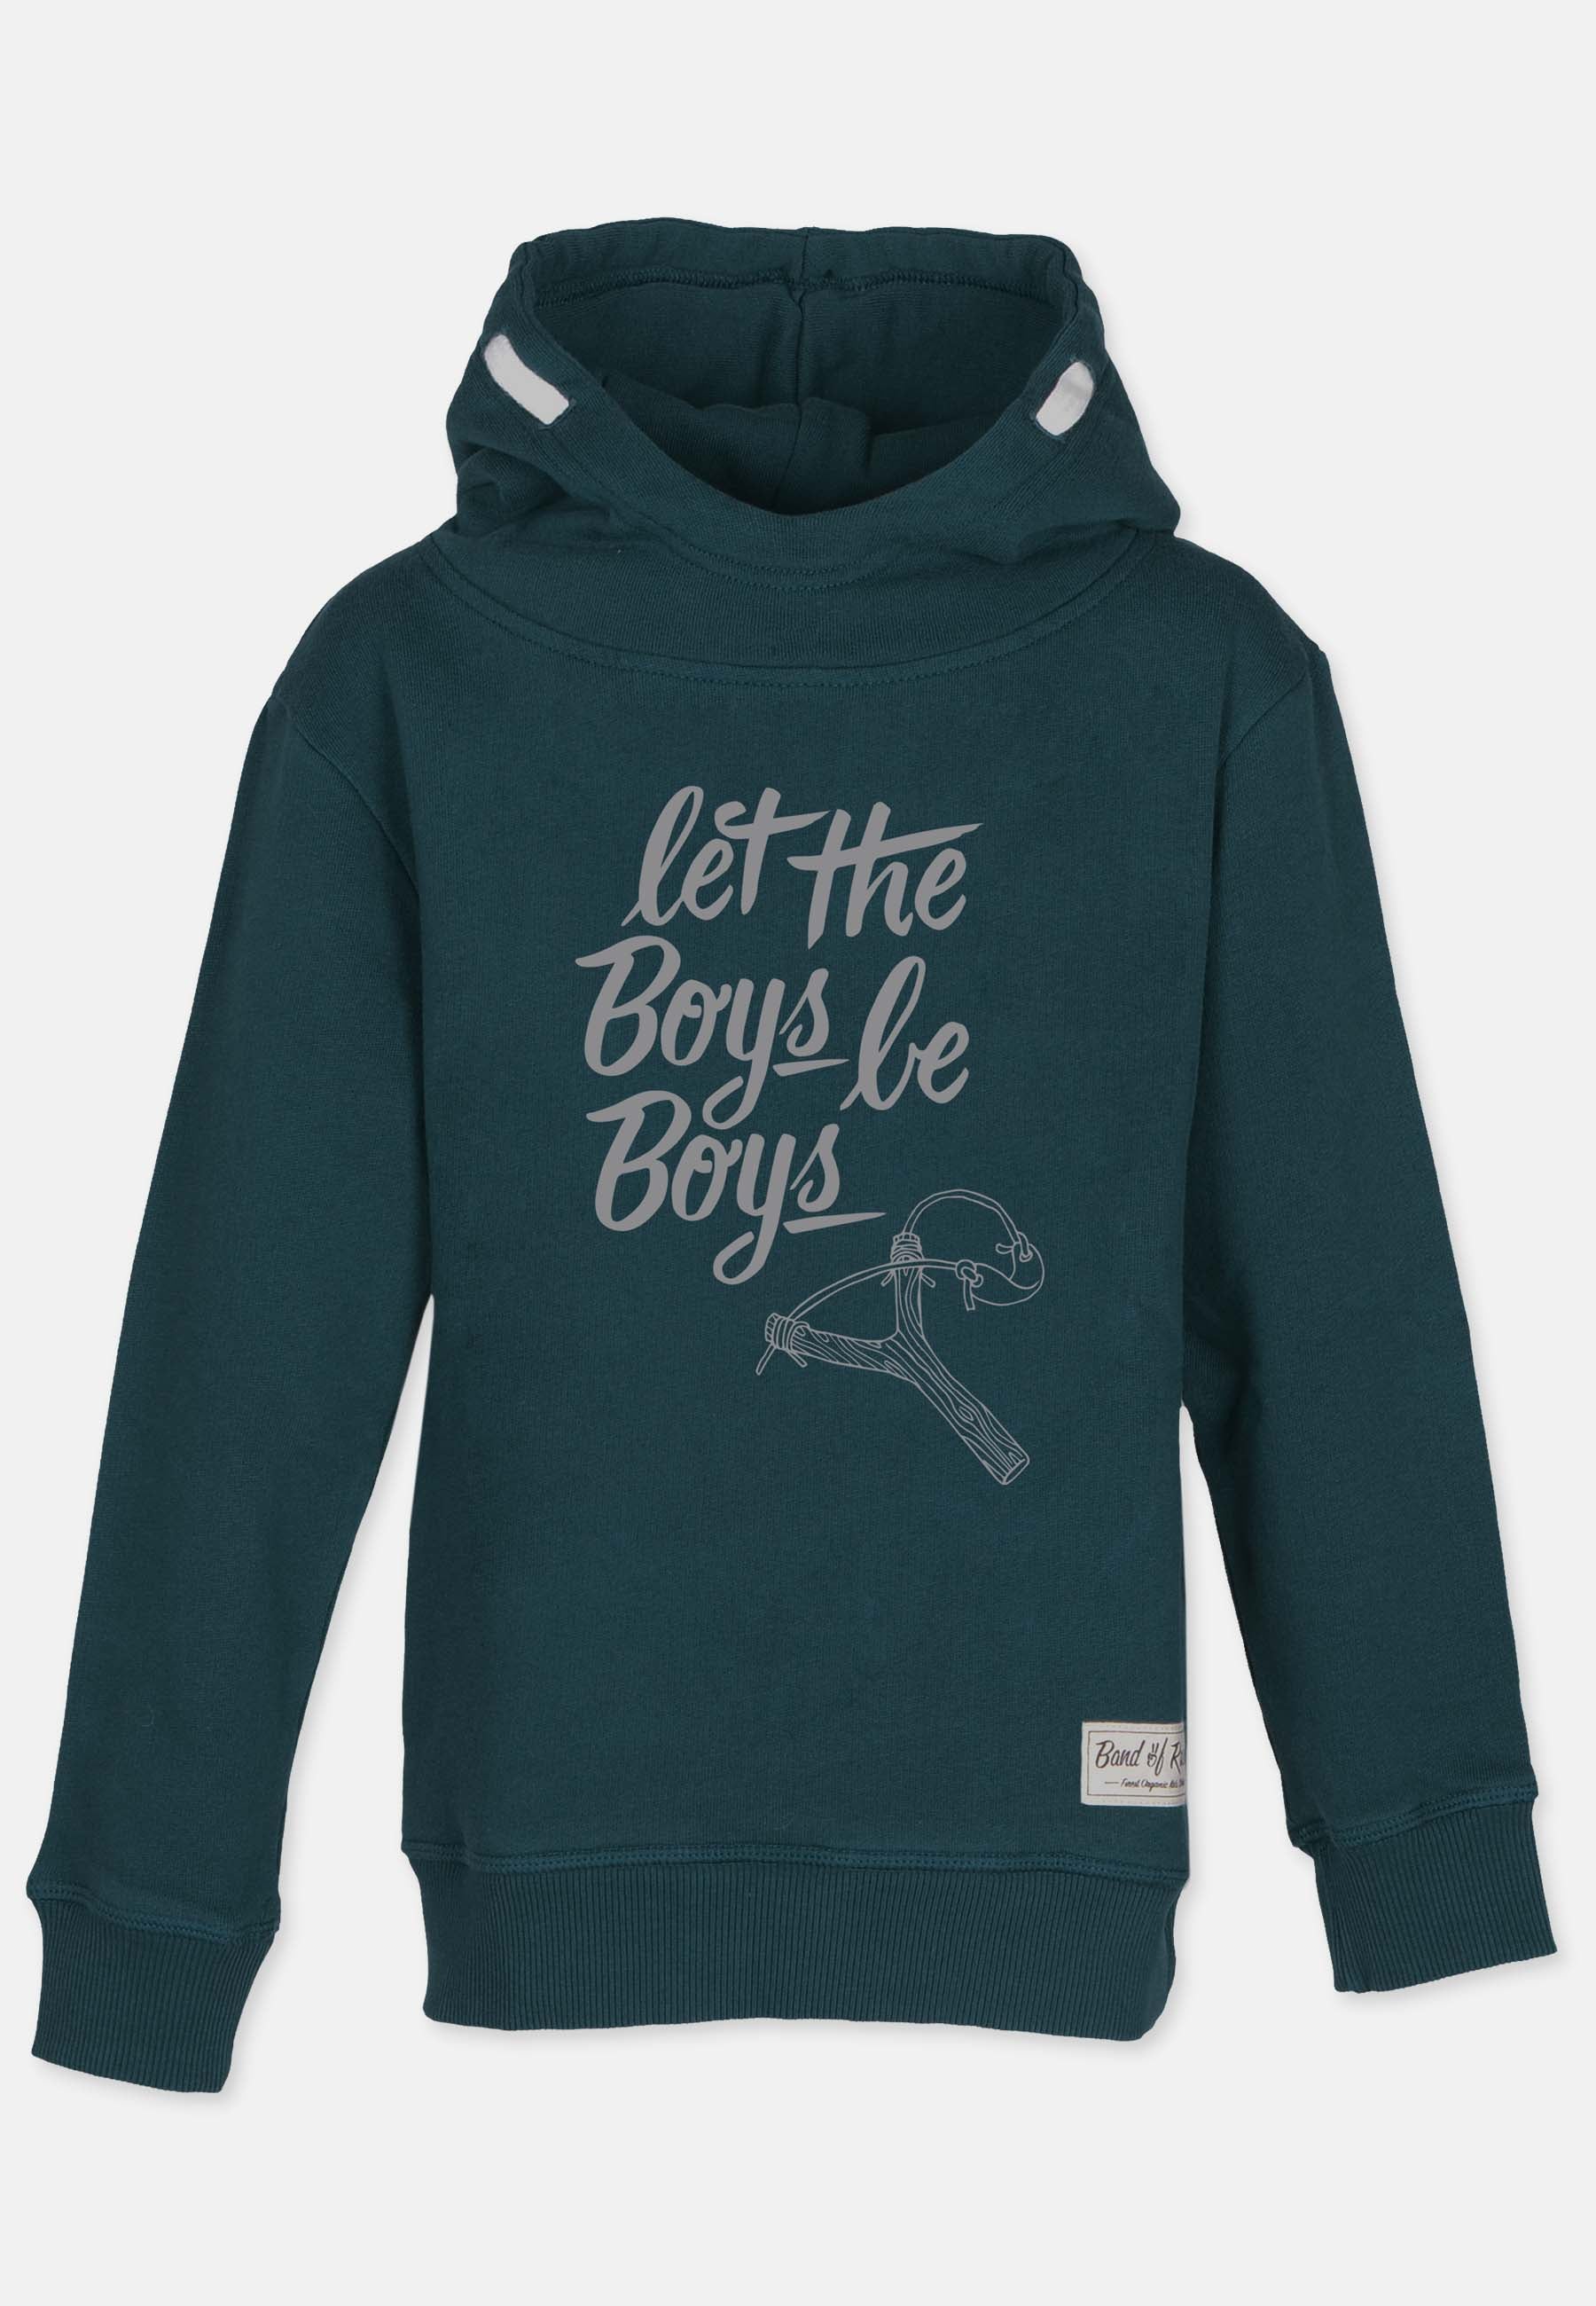 Let the Boys be Boys Hooded